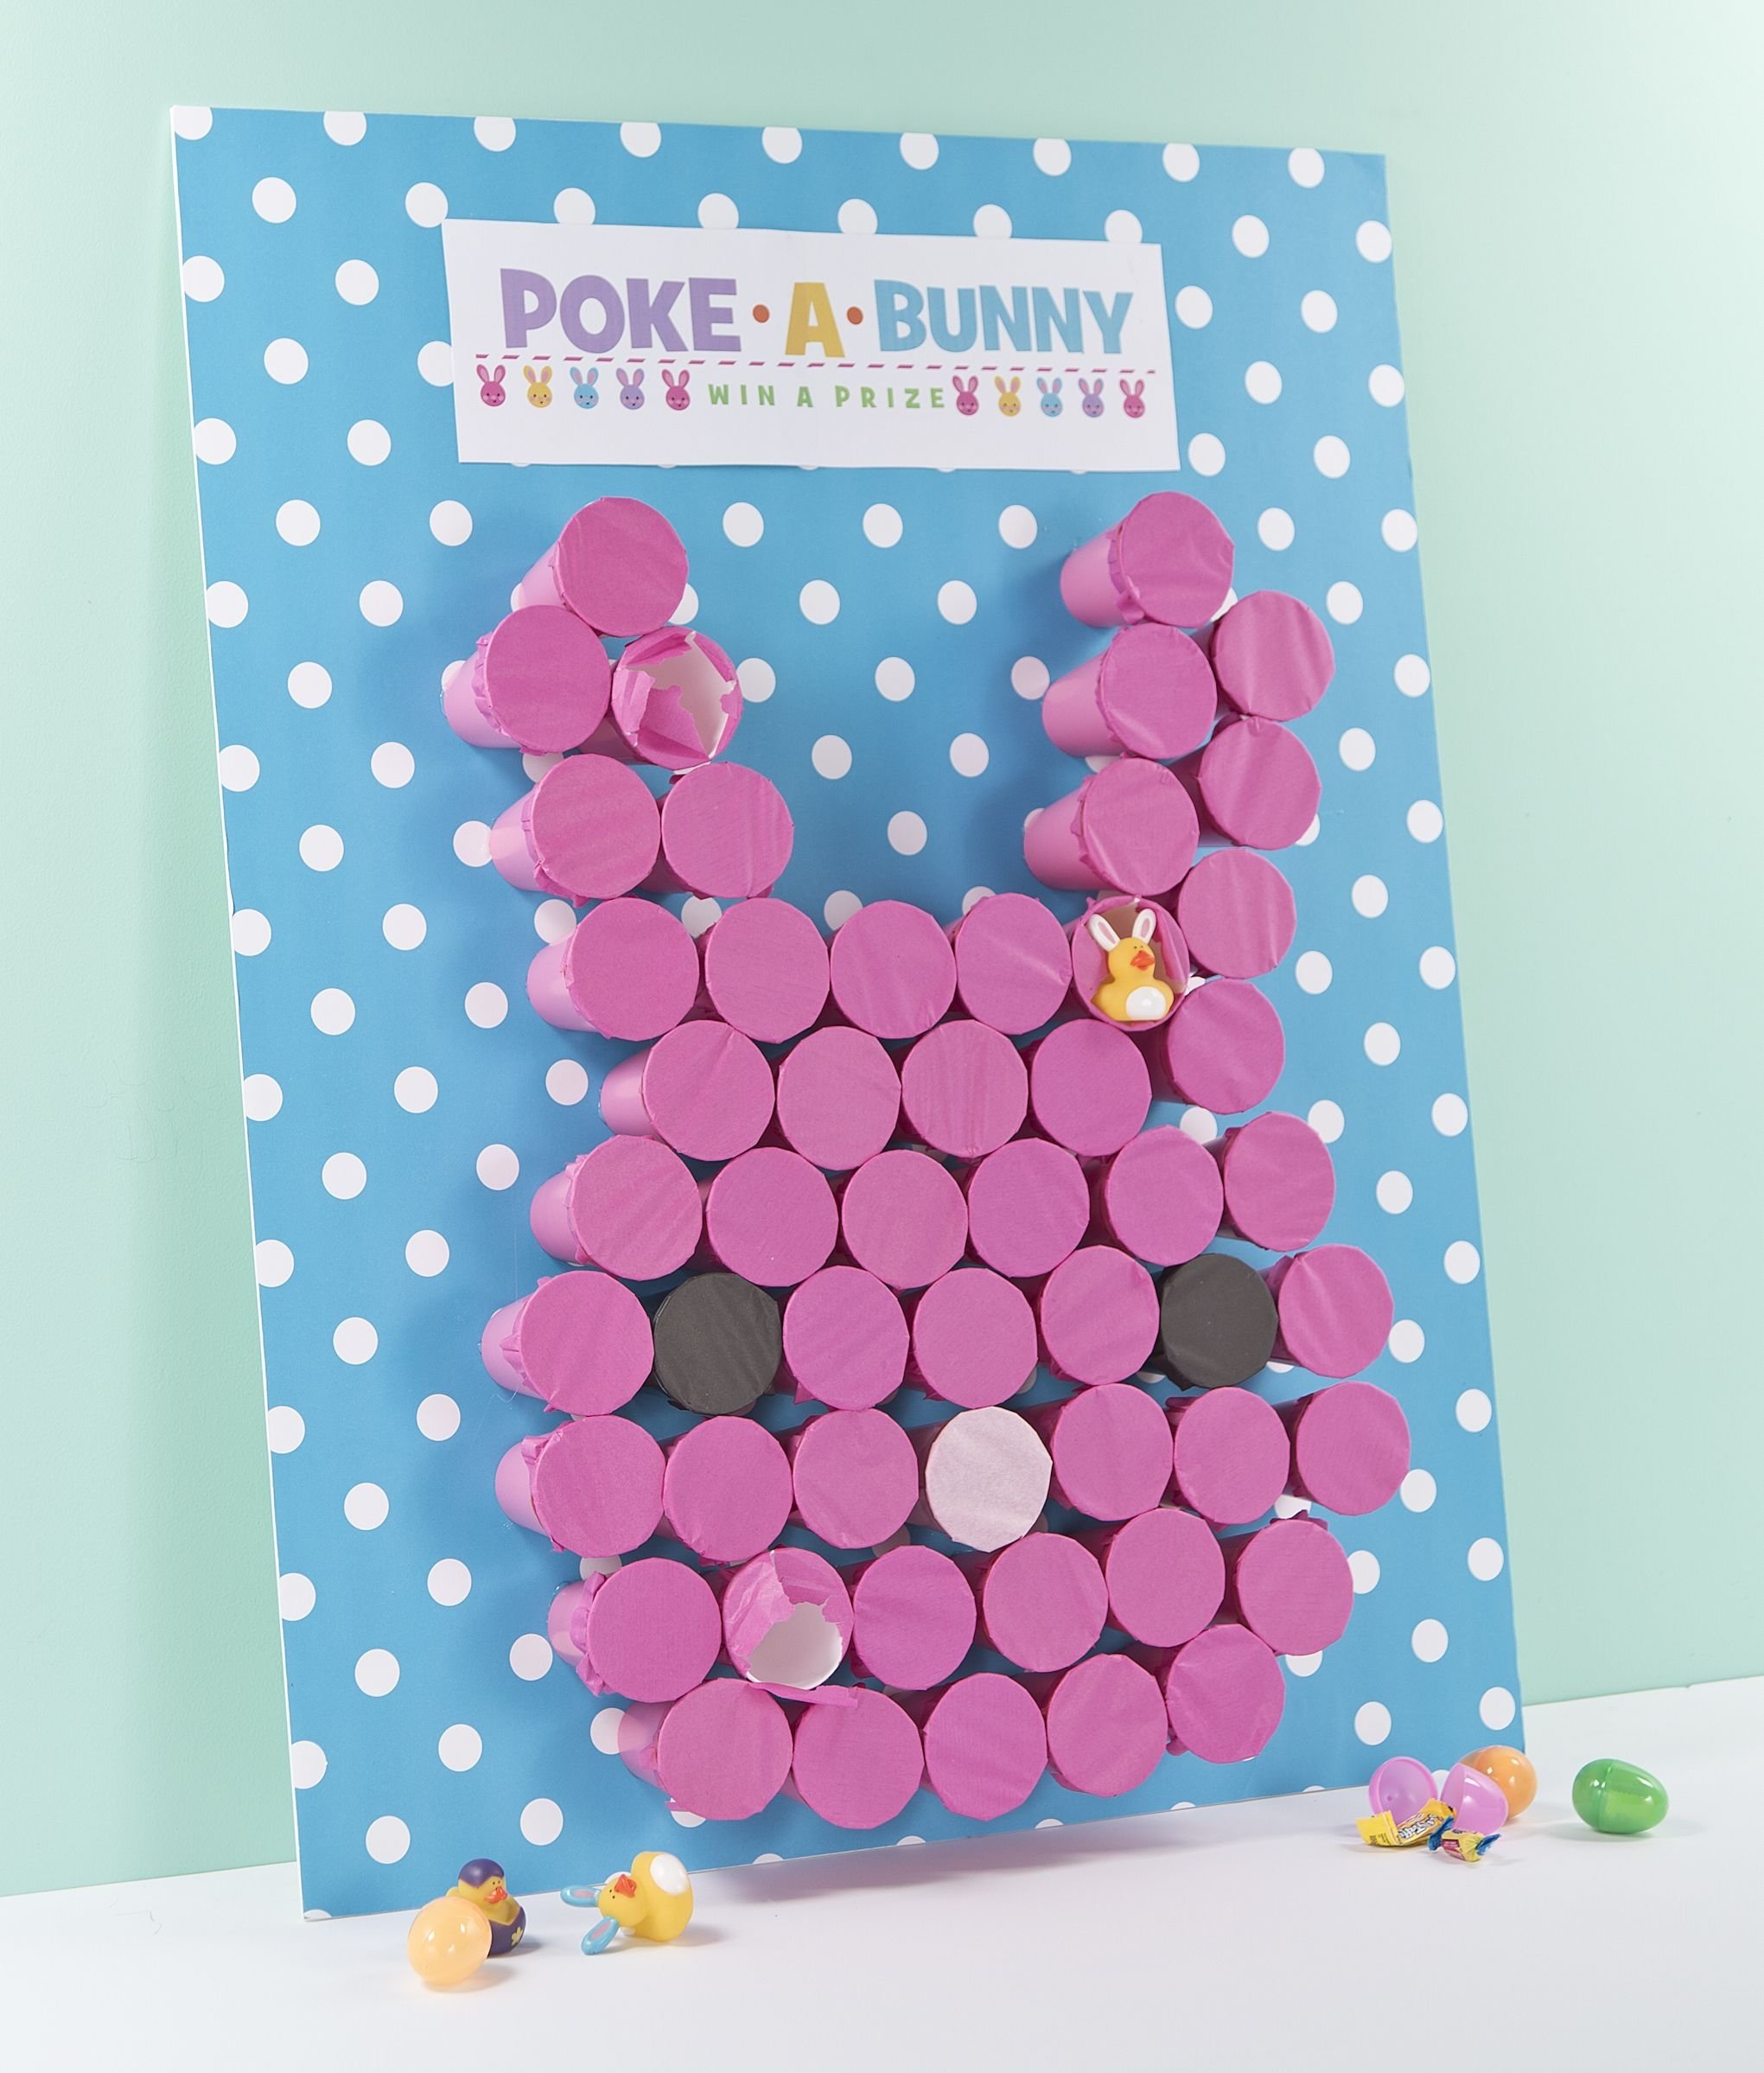 10 Great Easter Game Ideas For Adults fun easter game ideas easter bunny and egg 2022